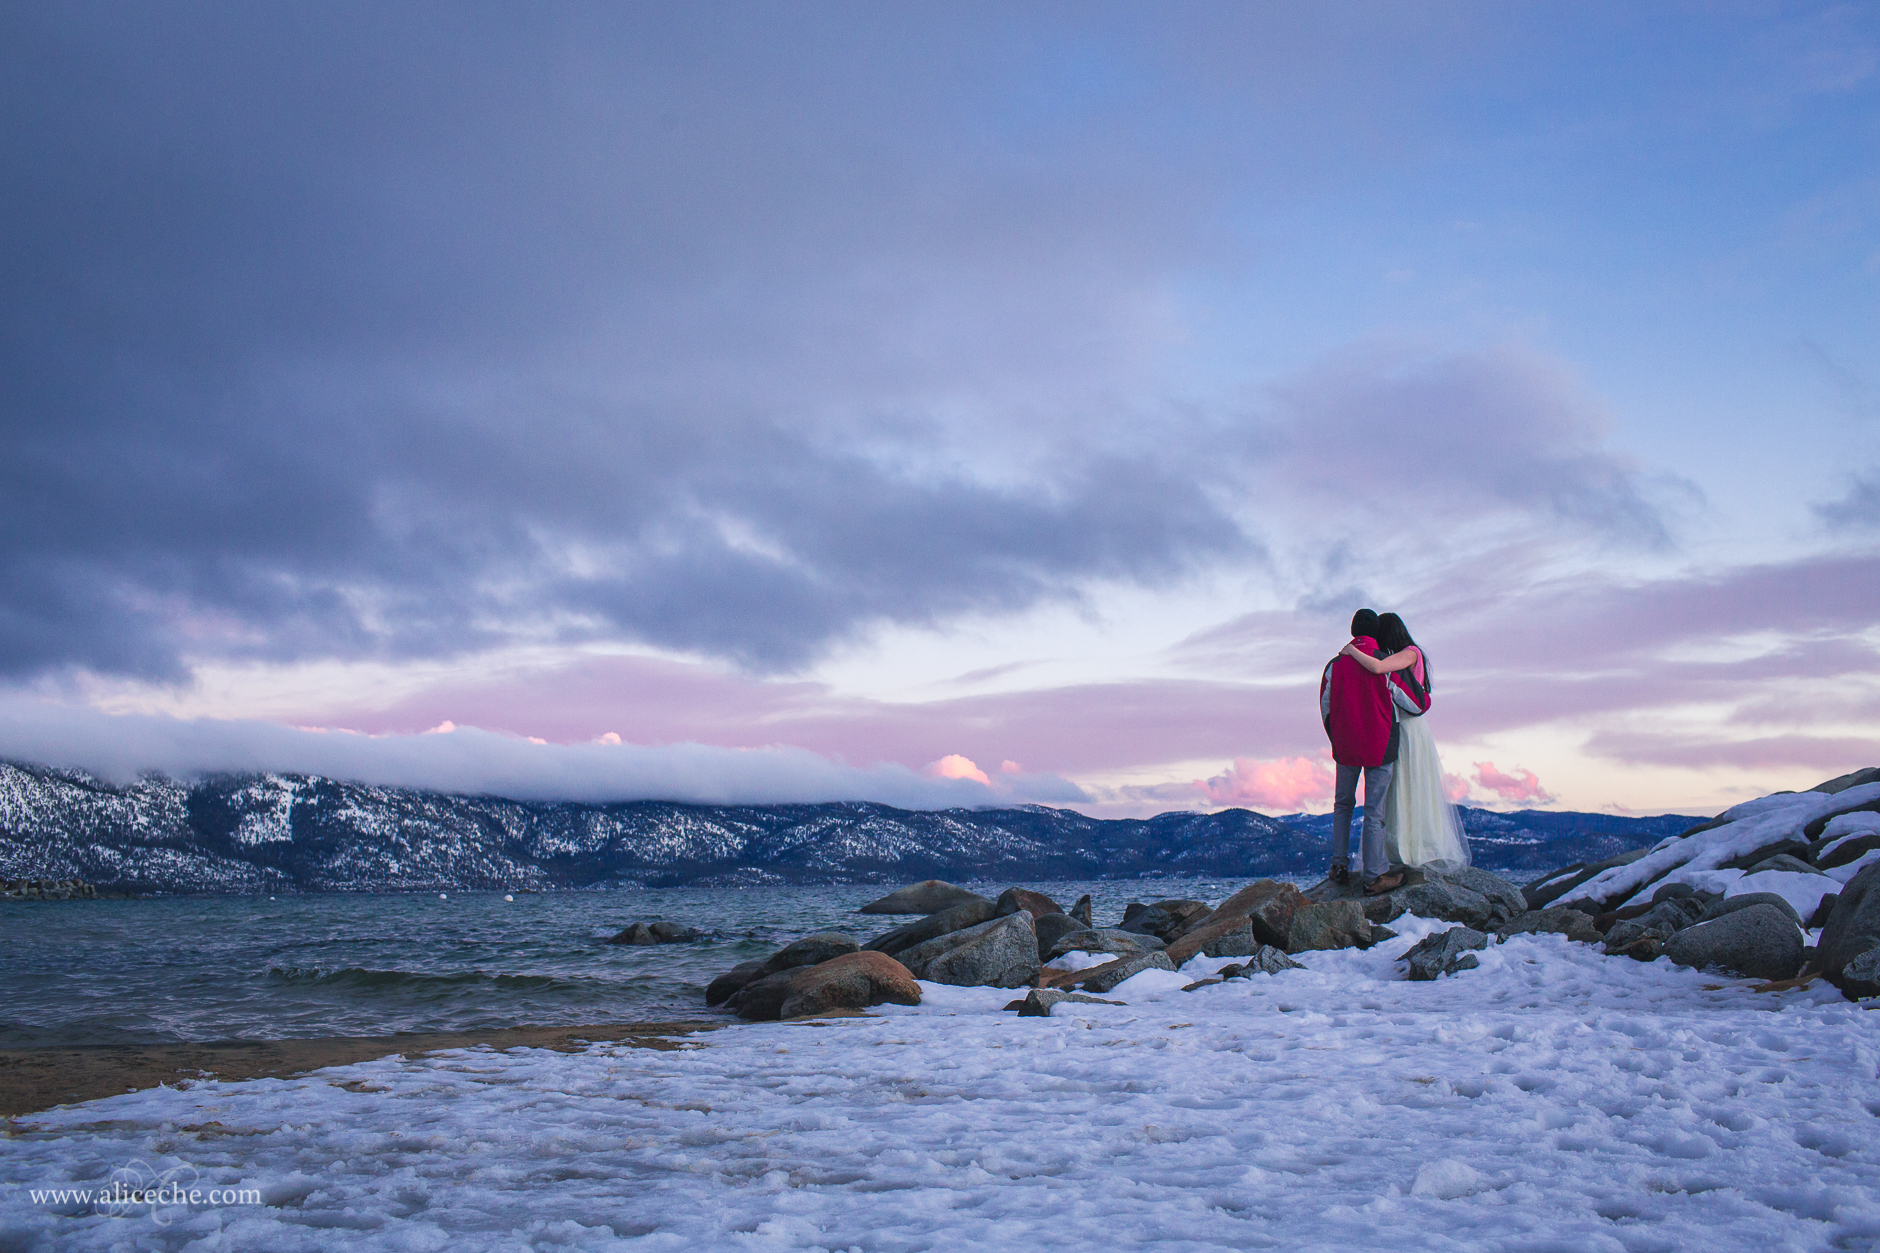 alice-che-photography-lake-tahoe-self-portrait-sunset-movement-couple-on-rocks-with-snow